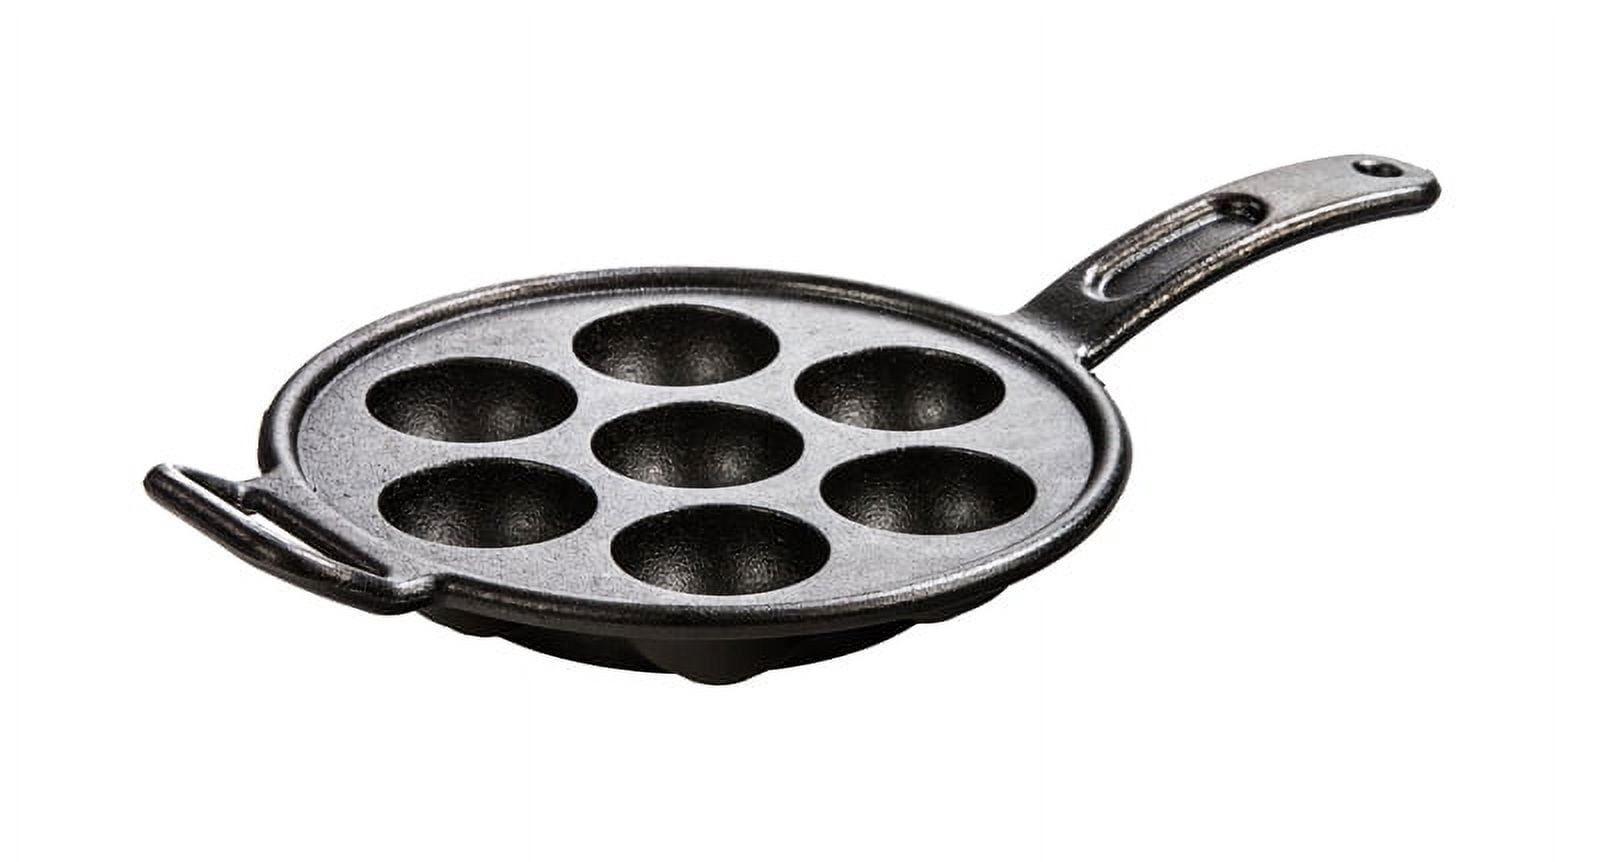 Lodge Aebleskiver Pan Seasoned Cast Iron, P7A3, with assist handle 